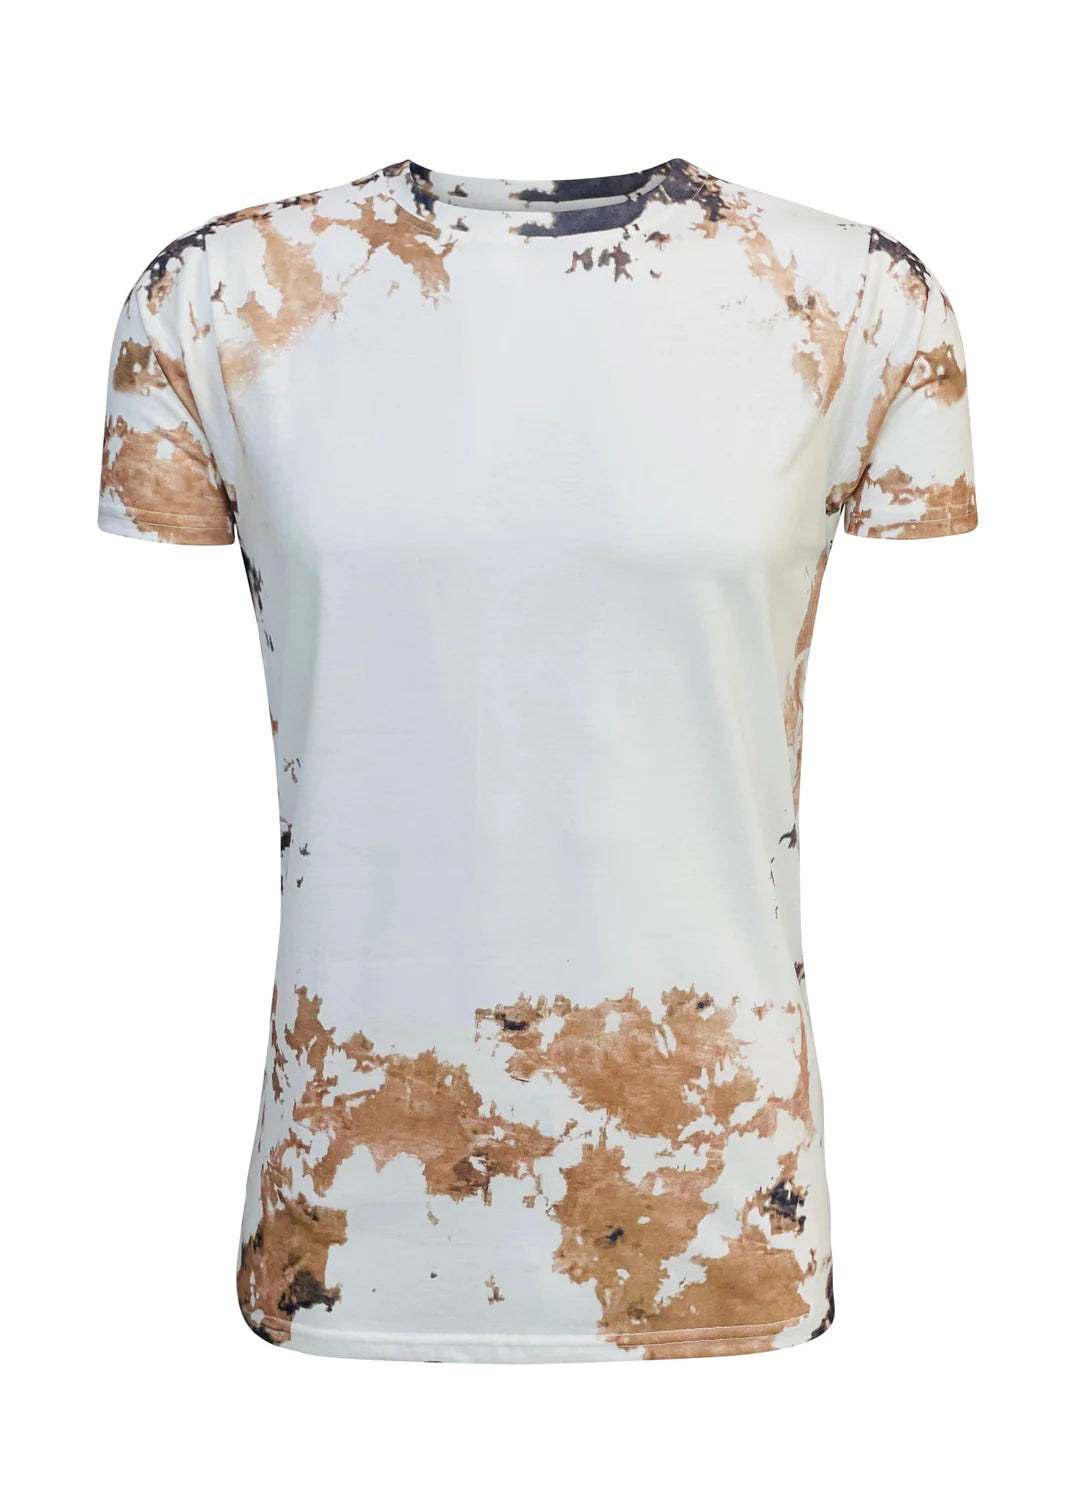 Adult Reverse SHORT Sleeve Faux Bleach Cow Shirts, ready for Sublimation